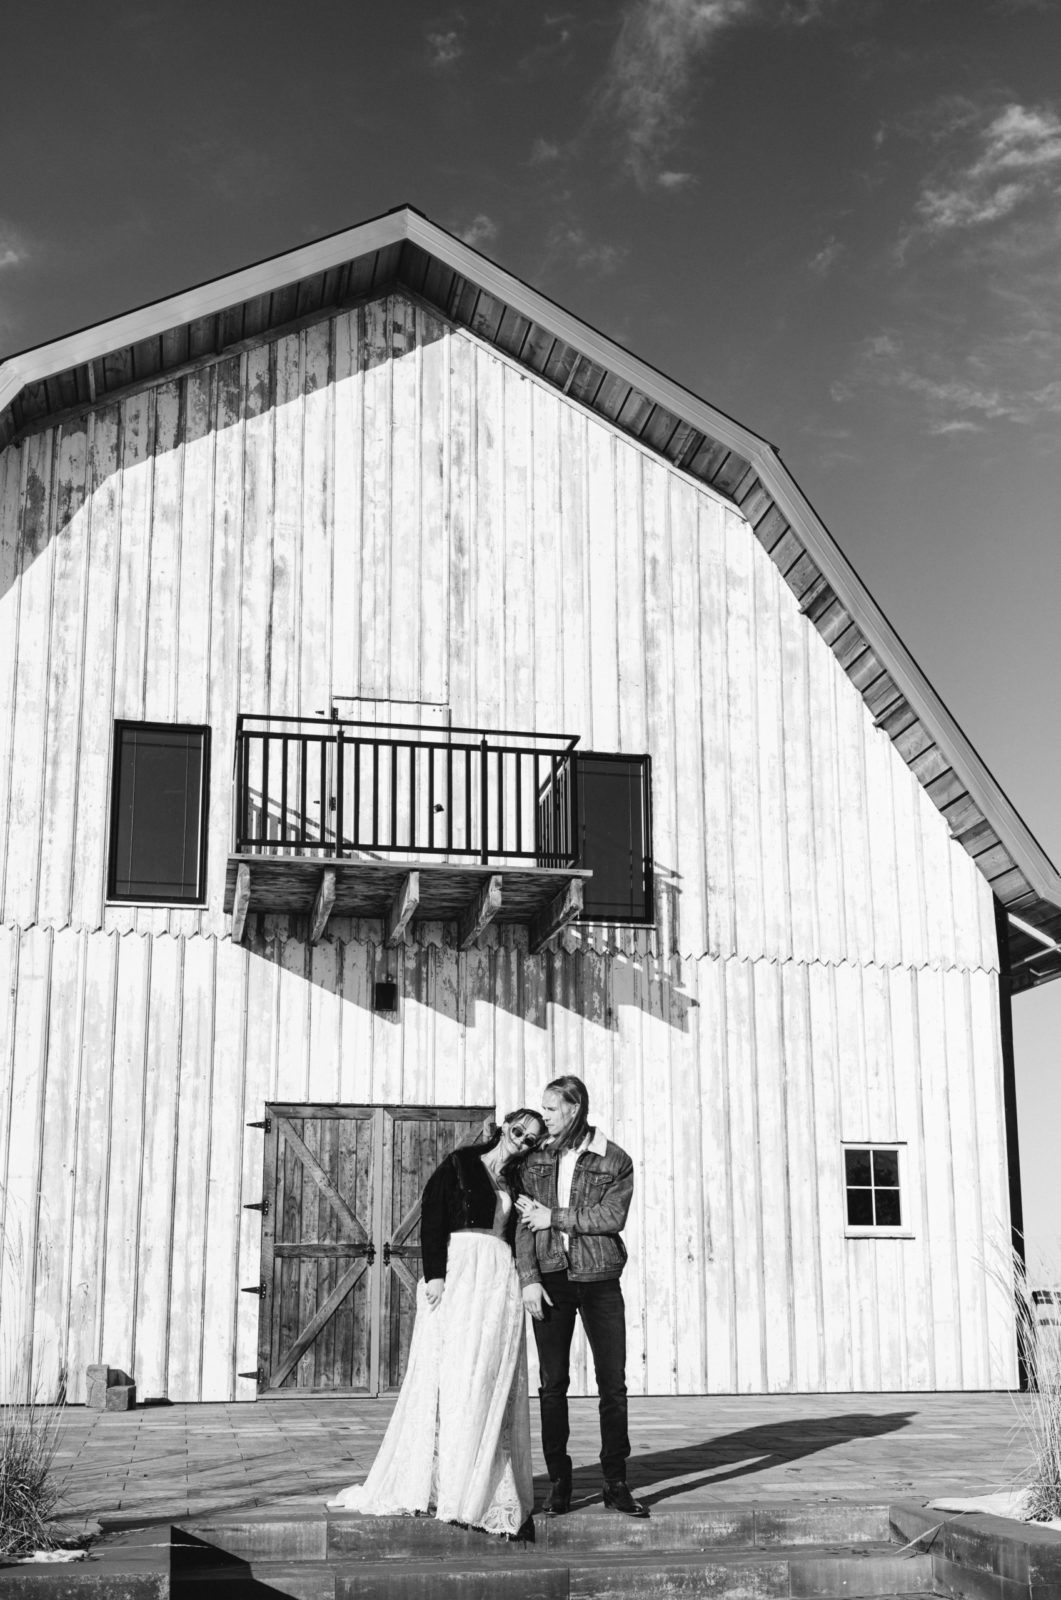 wedding portraits, black and white photography, bridal inspiration for the alternative bride, barn wedding, black and white photography